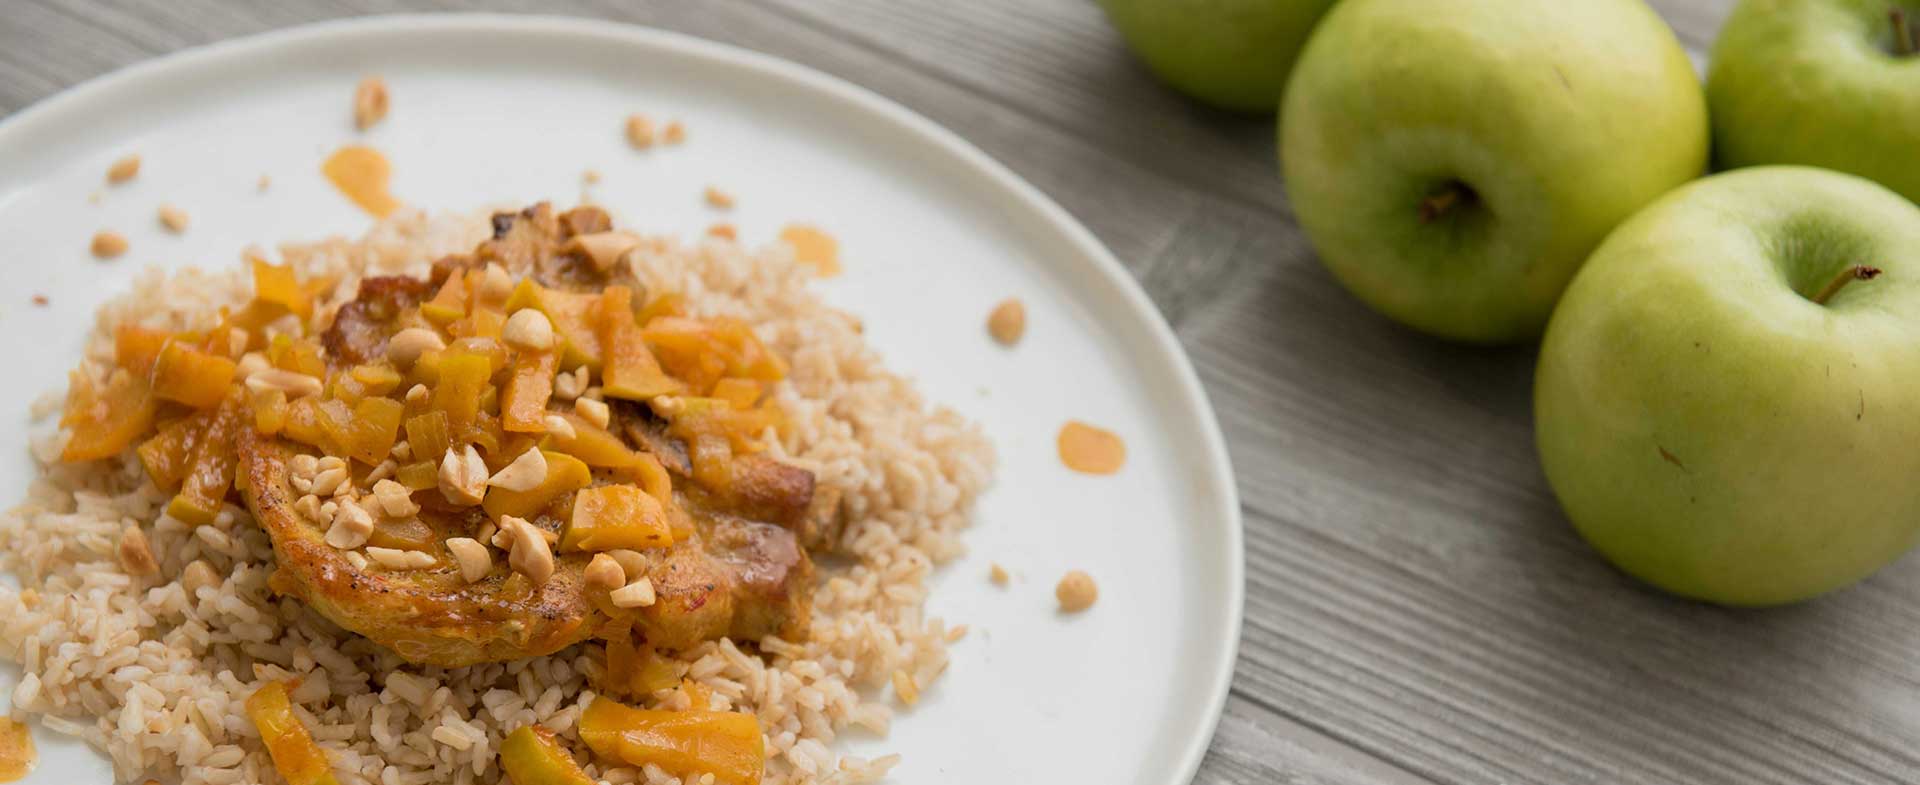 Curried pork chops with apples recipe video 